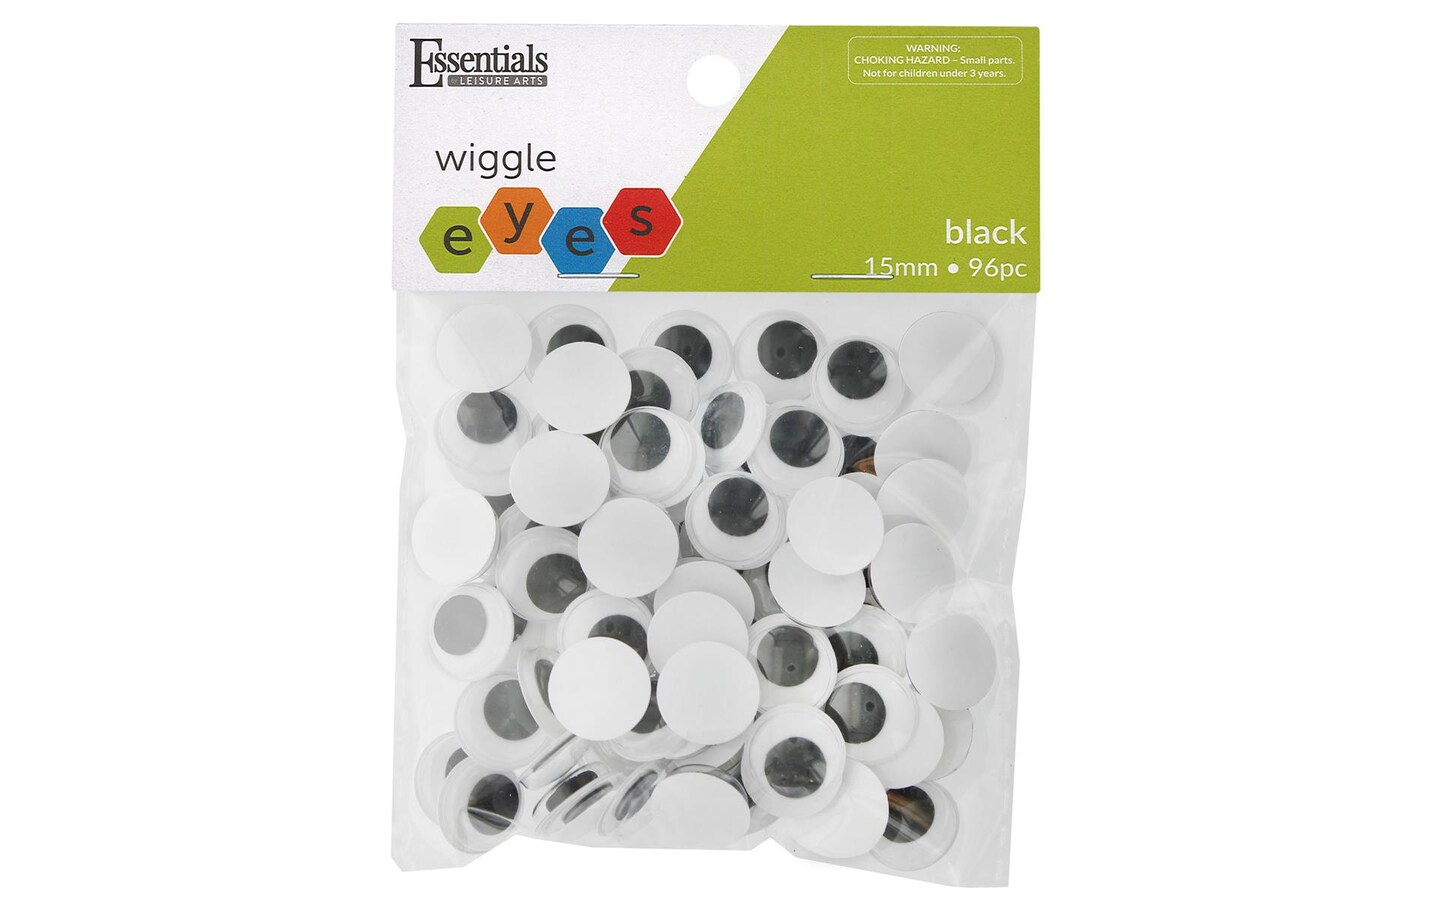  Essentials by Leisure Arts Eyes Paste On Moveable 15mm Black  96pc Googly Eyes, Google Eyes for Crafts, Big Googly Eyes for Crafts,  Wiggle Eyes, Craft Eyes : Arts, Crafts & Sewing